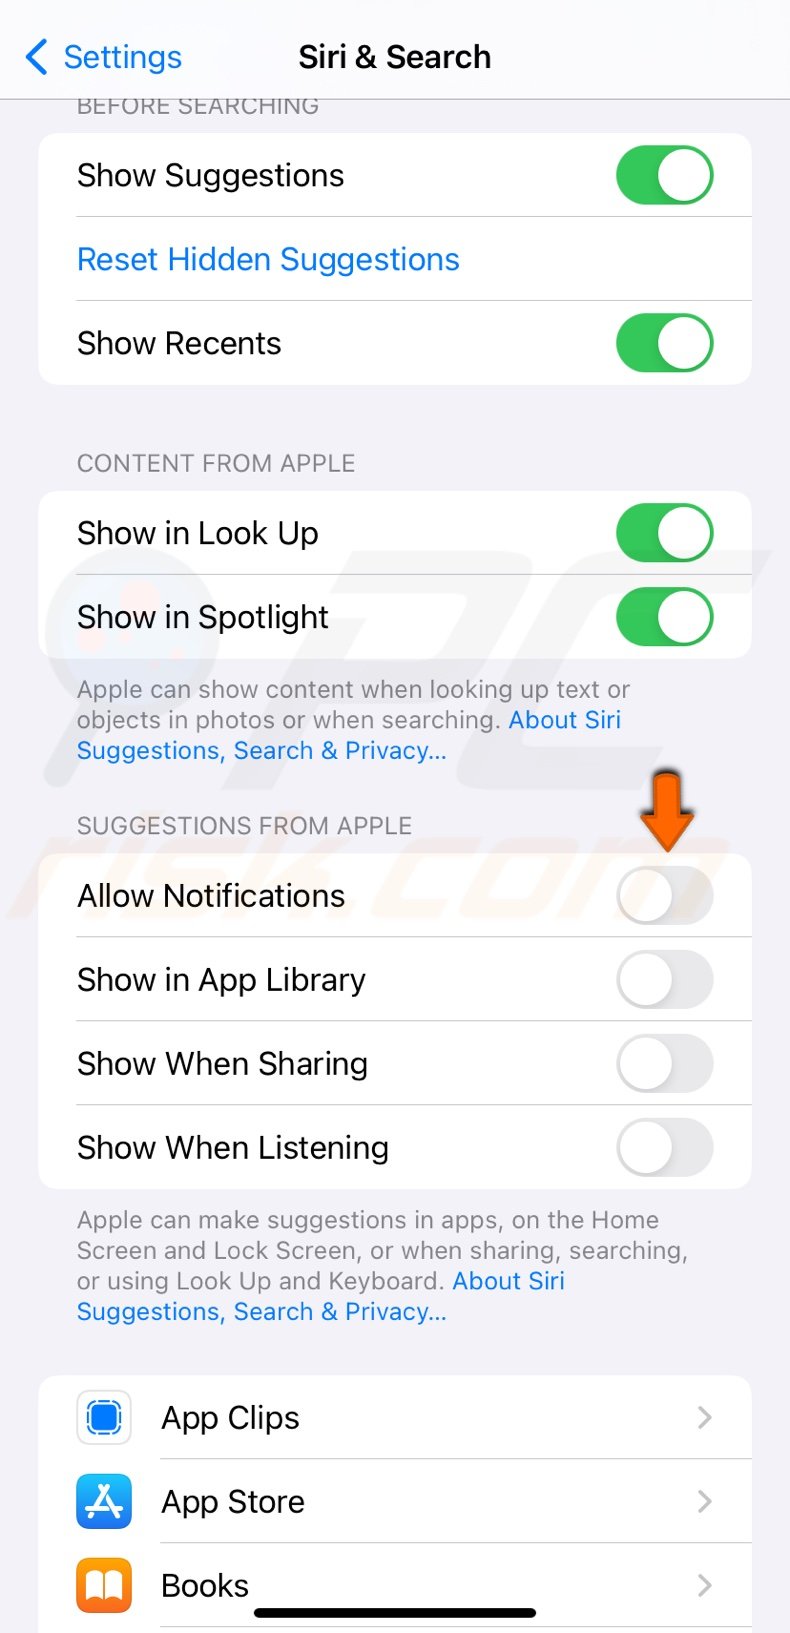 Disable Suggestions from Apple